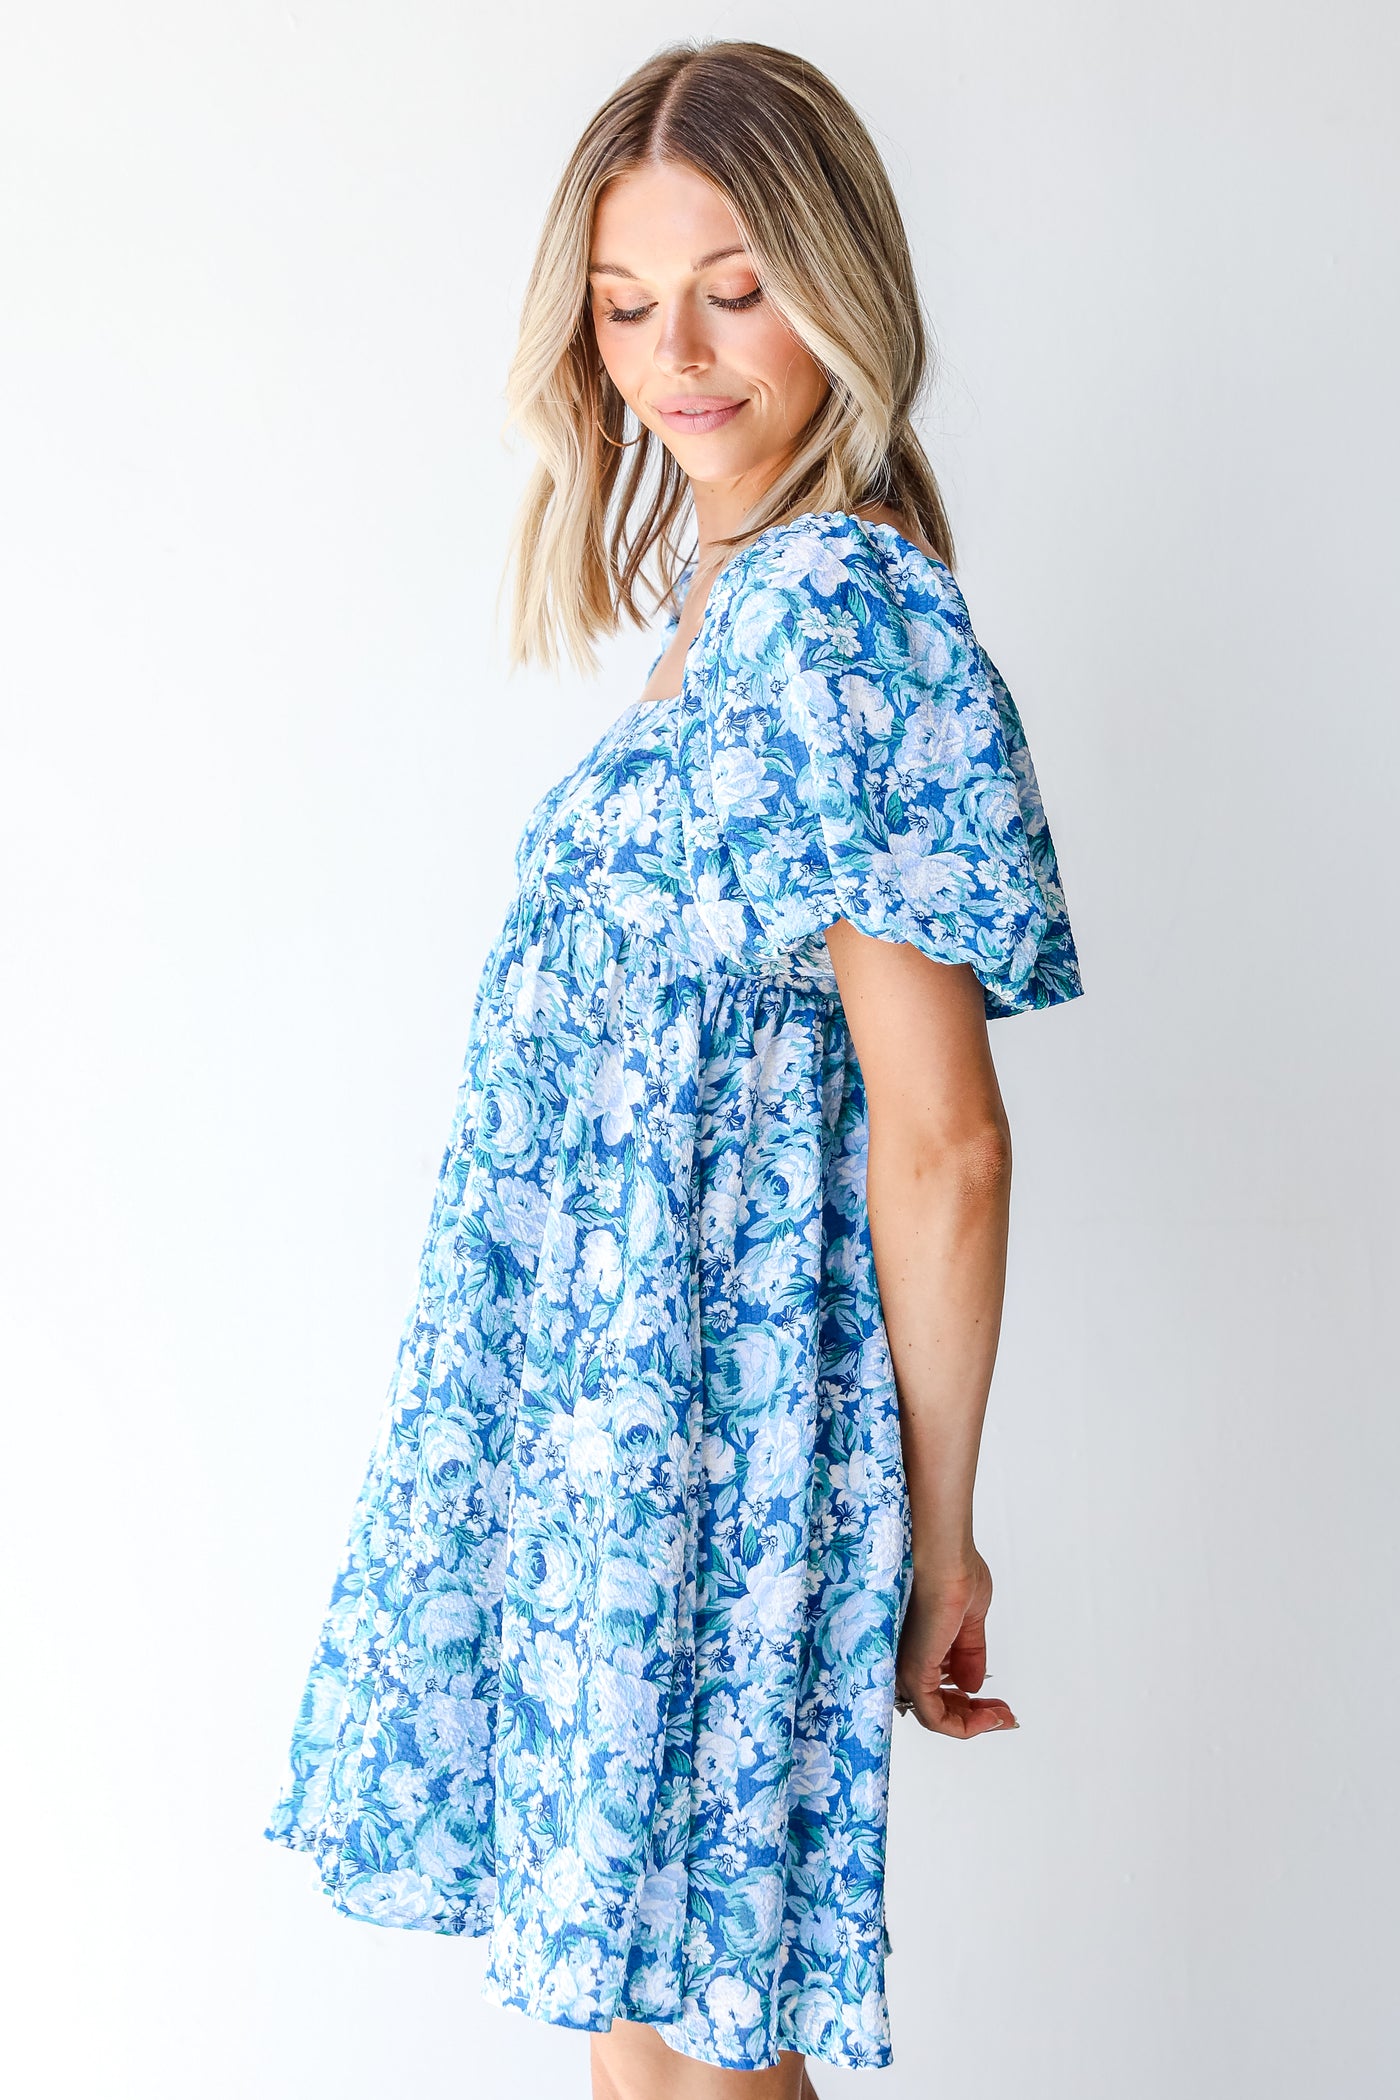 Floral Babydoll Mini Dress in blue side view